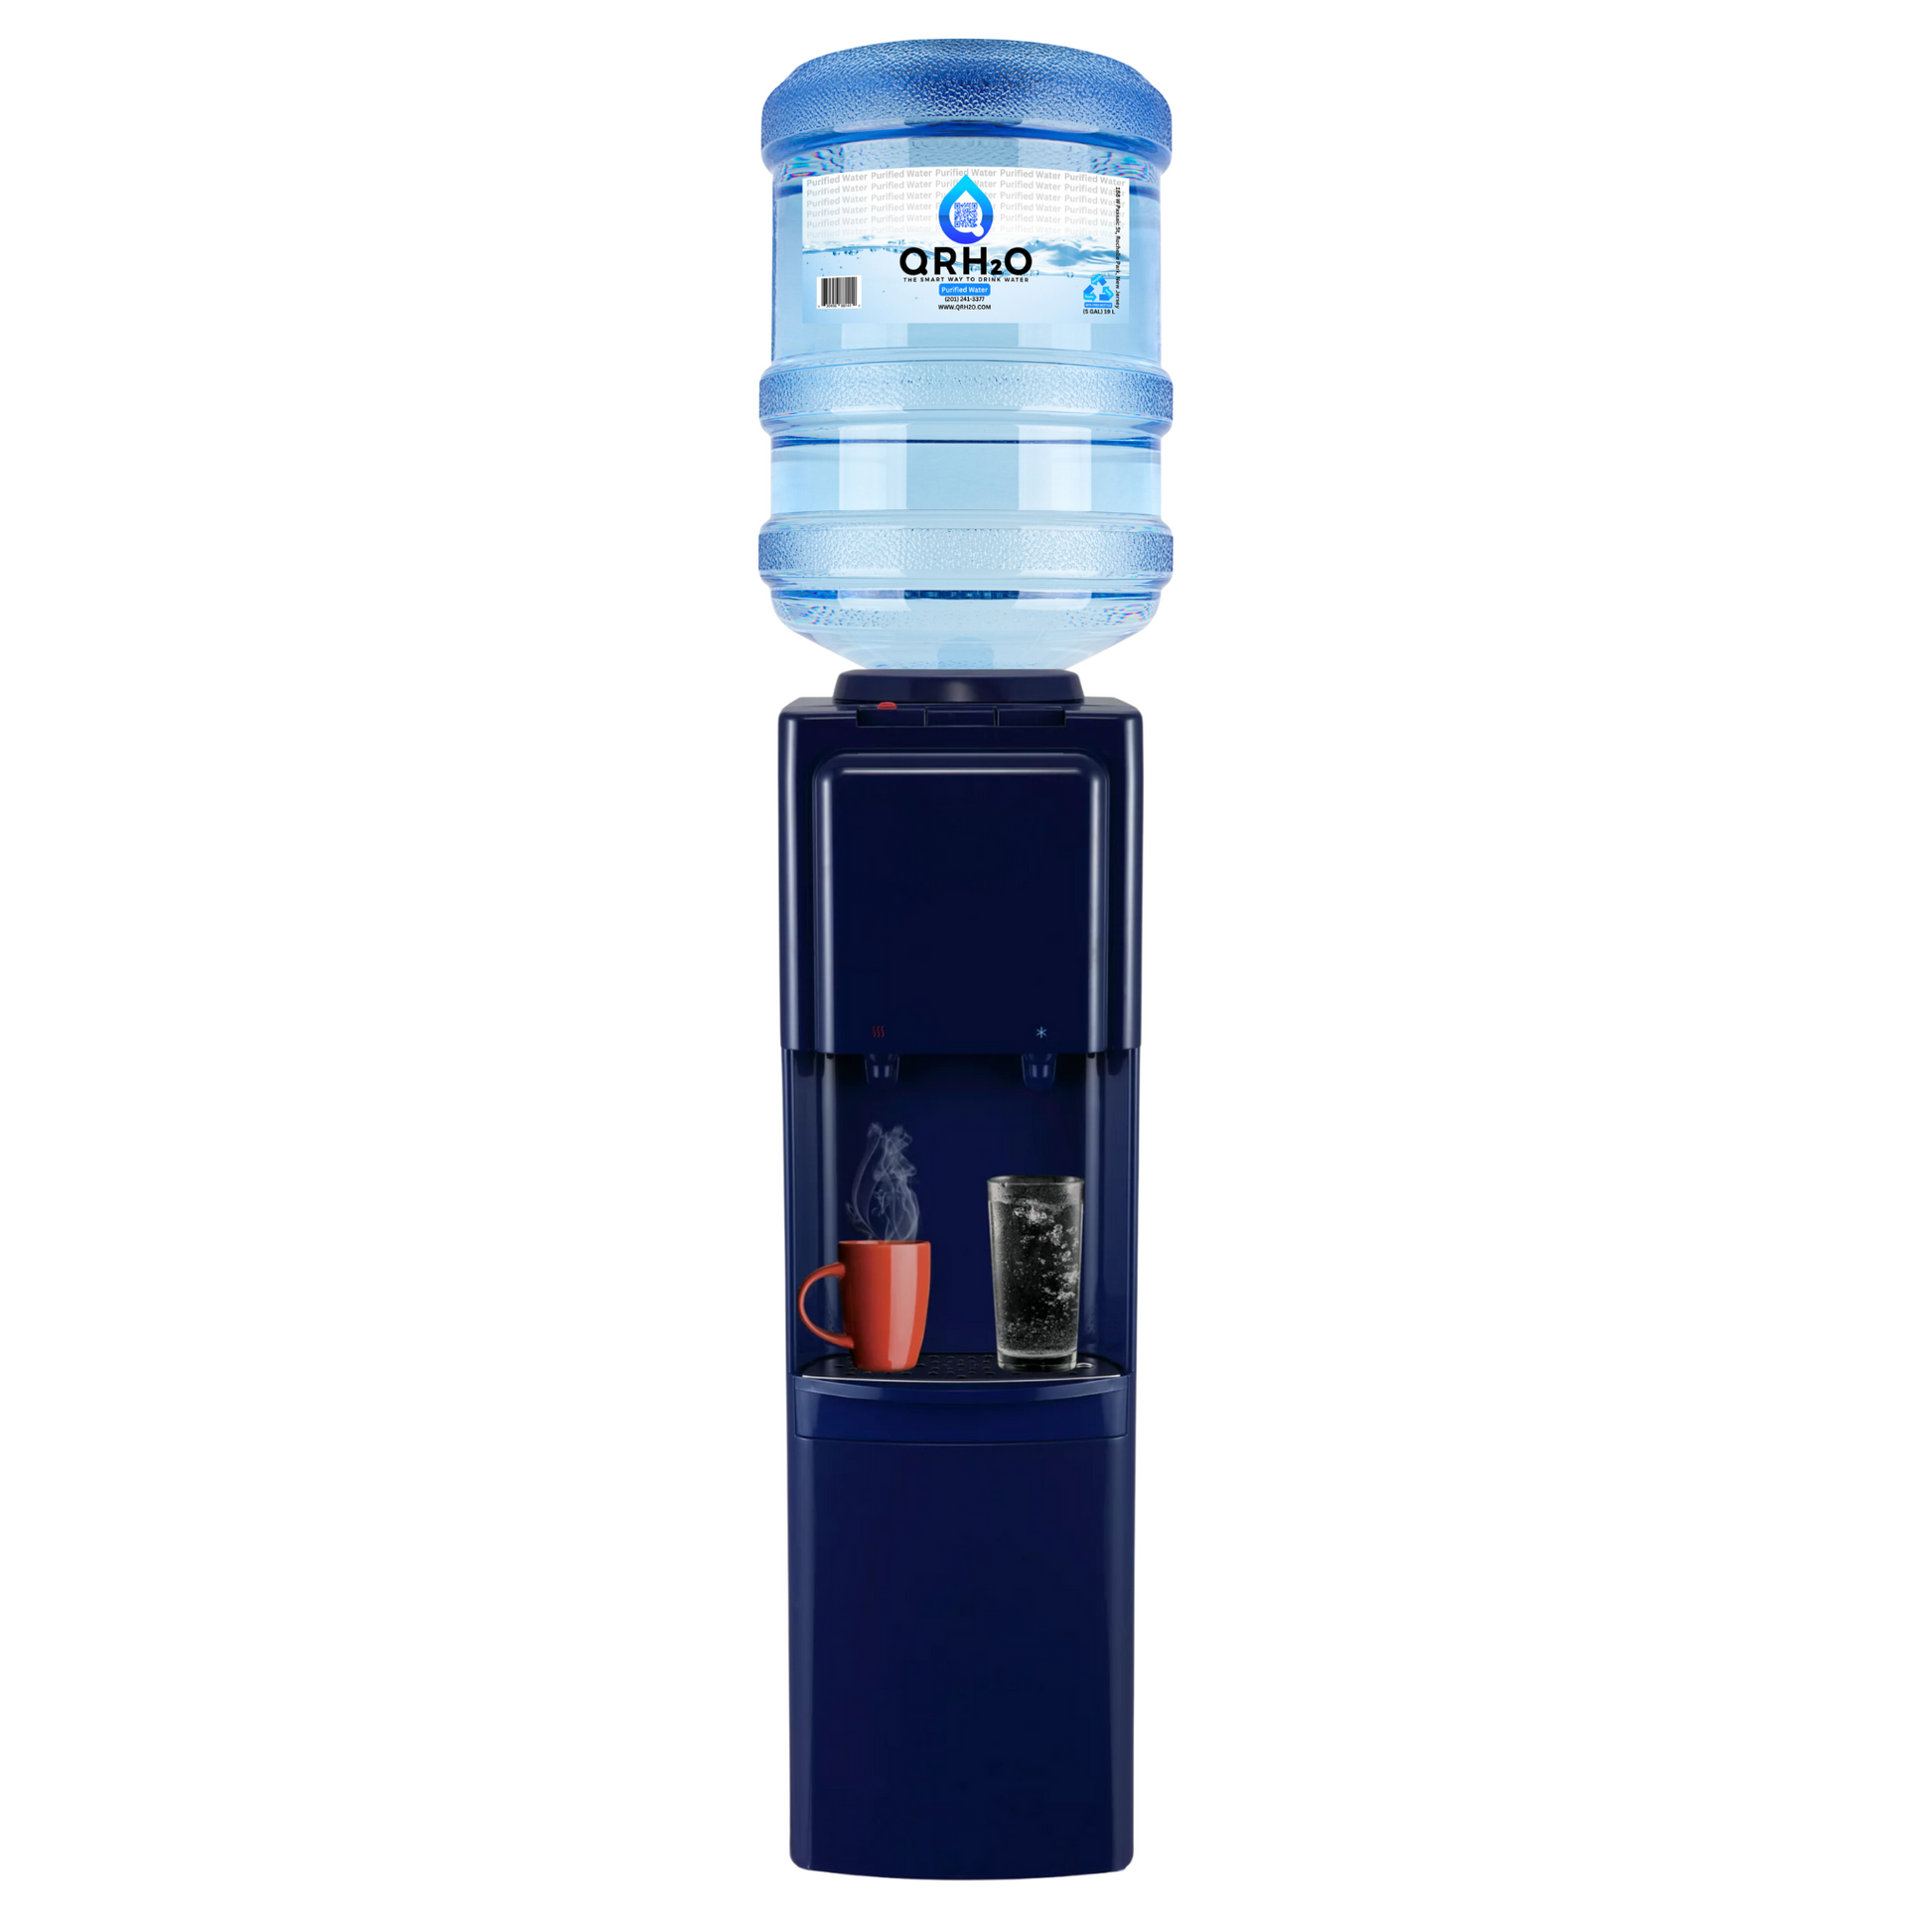 Stay hydrated with ease thanks to the Primo top-loading water dispenser in navy blue, which includes two 5-gallon water bottles and offers both hot and cold water options.